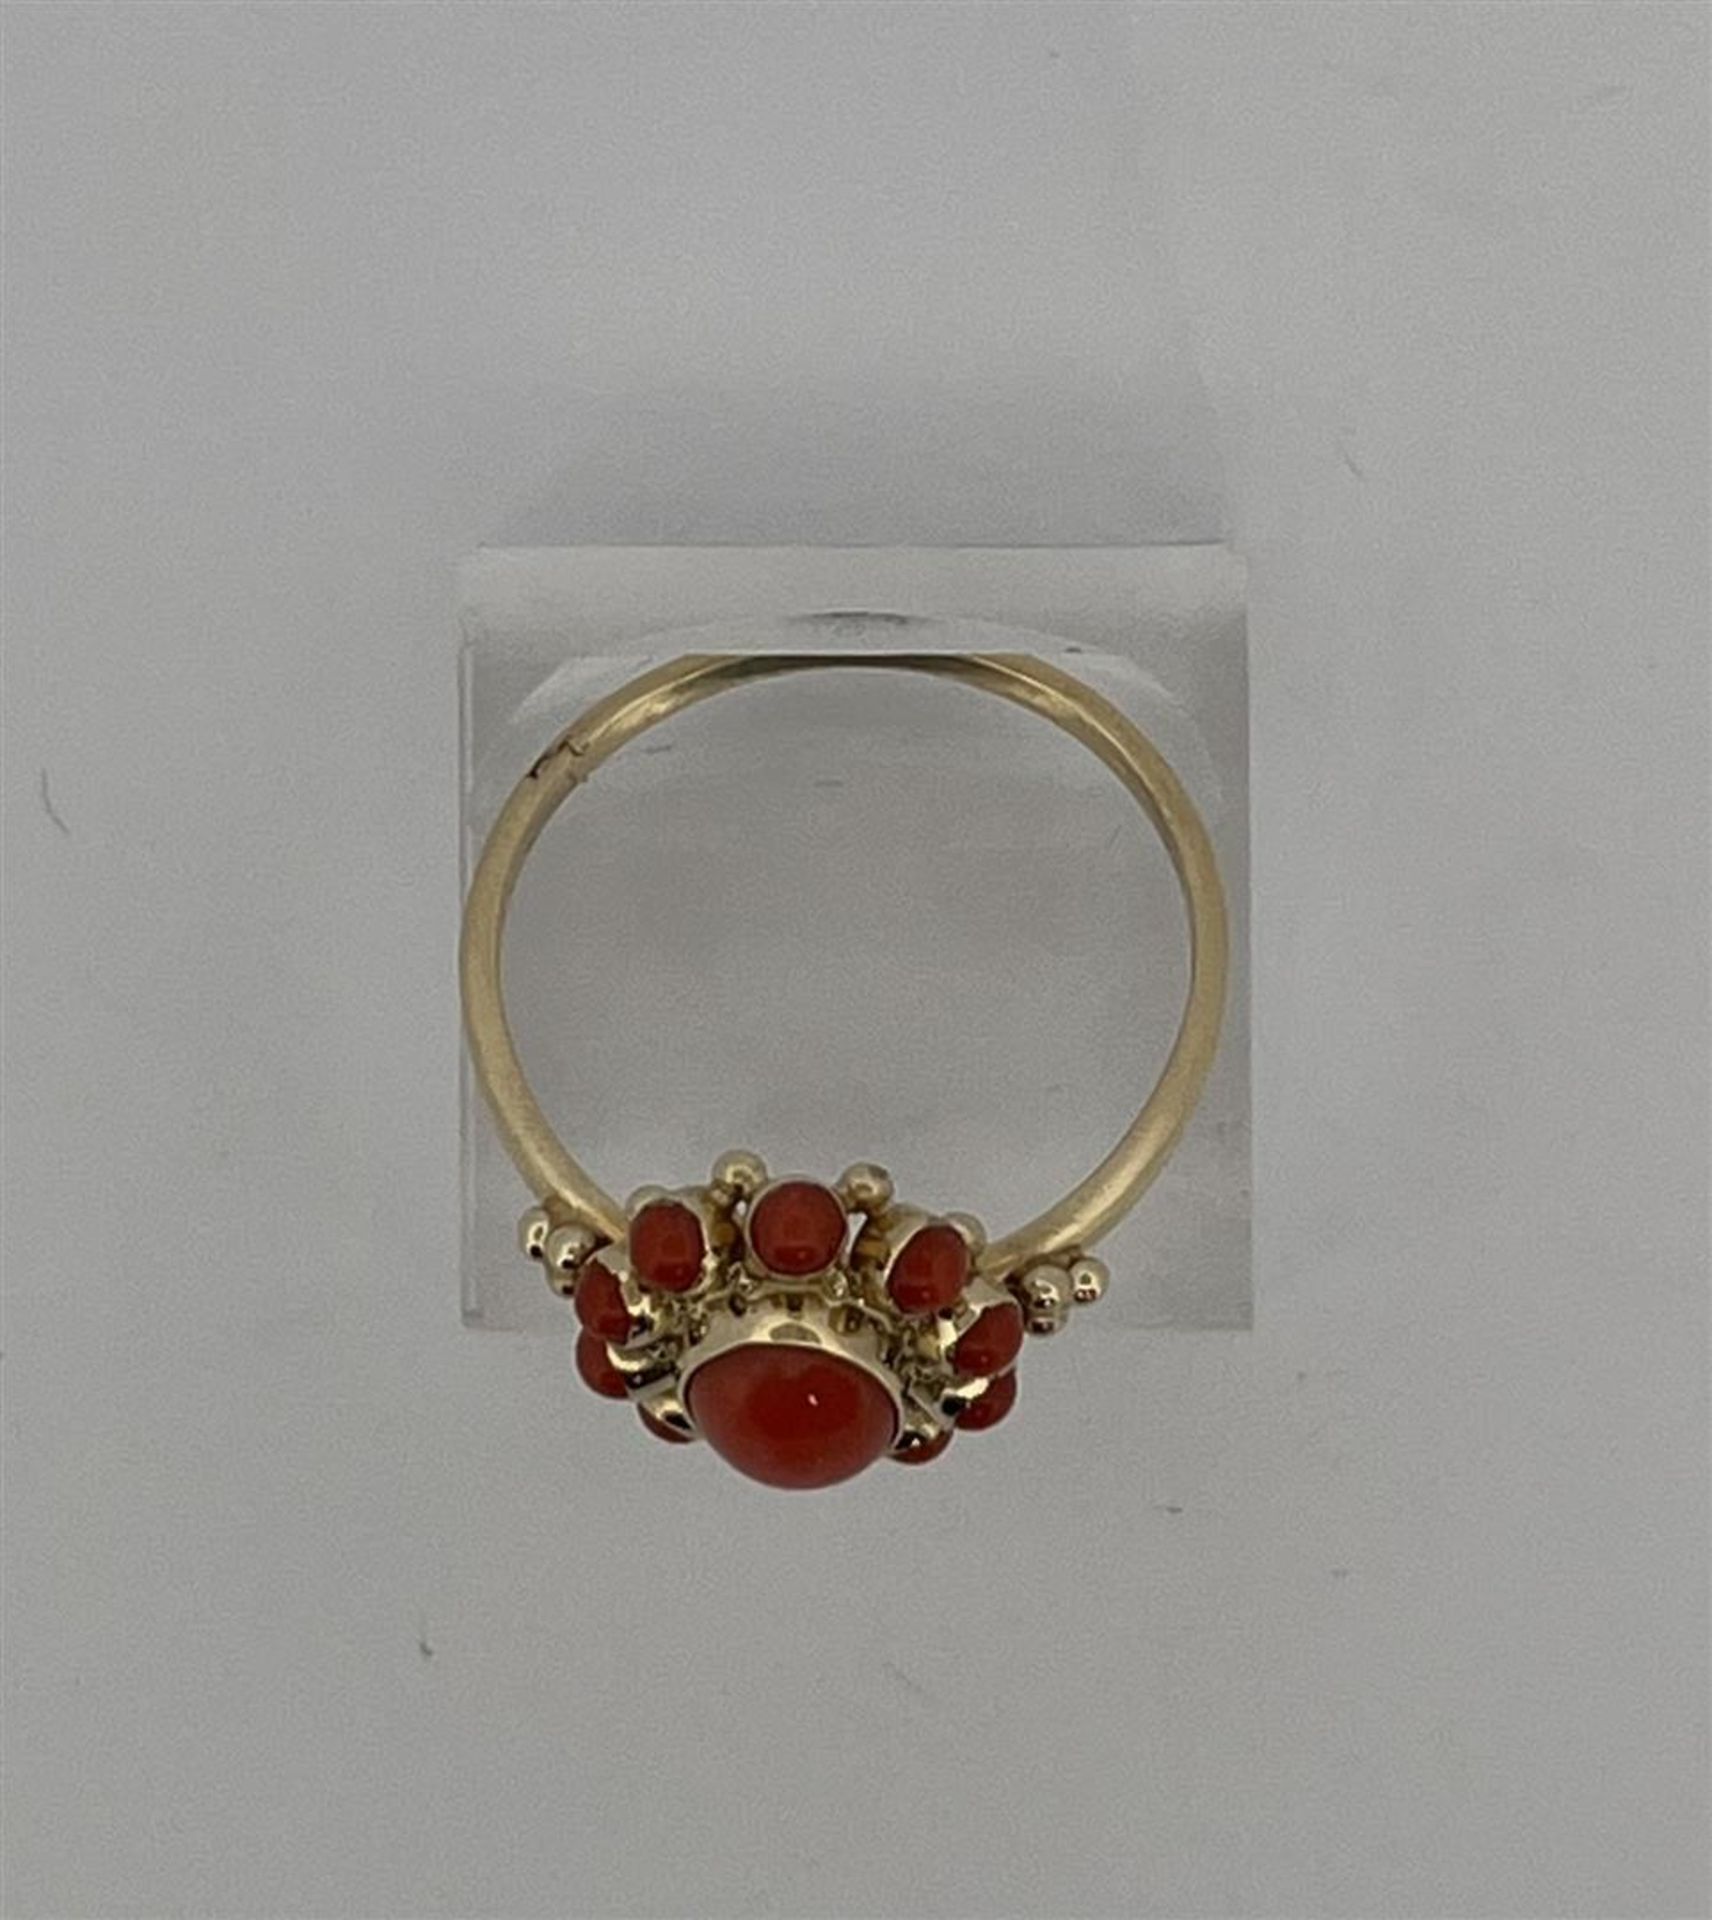 14kt yellow gold rosette ring set with red coral.
The ring is set with 1 central oval cabochon cut r - Image 2 of 7